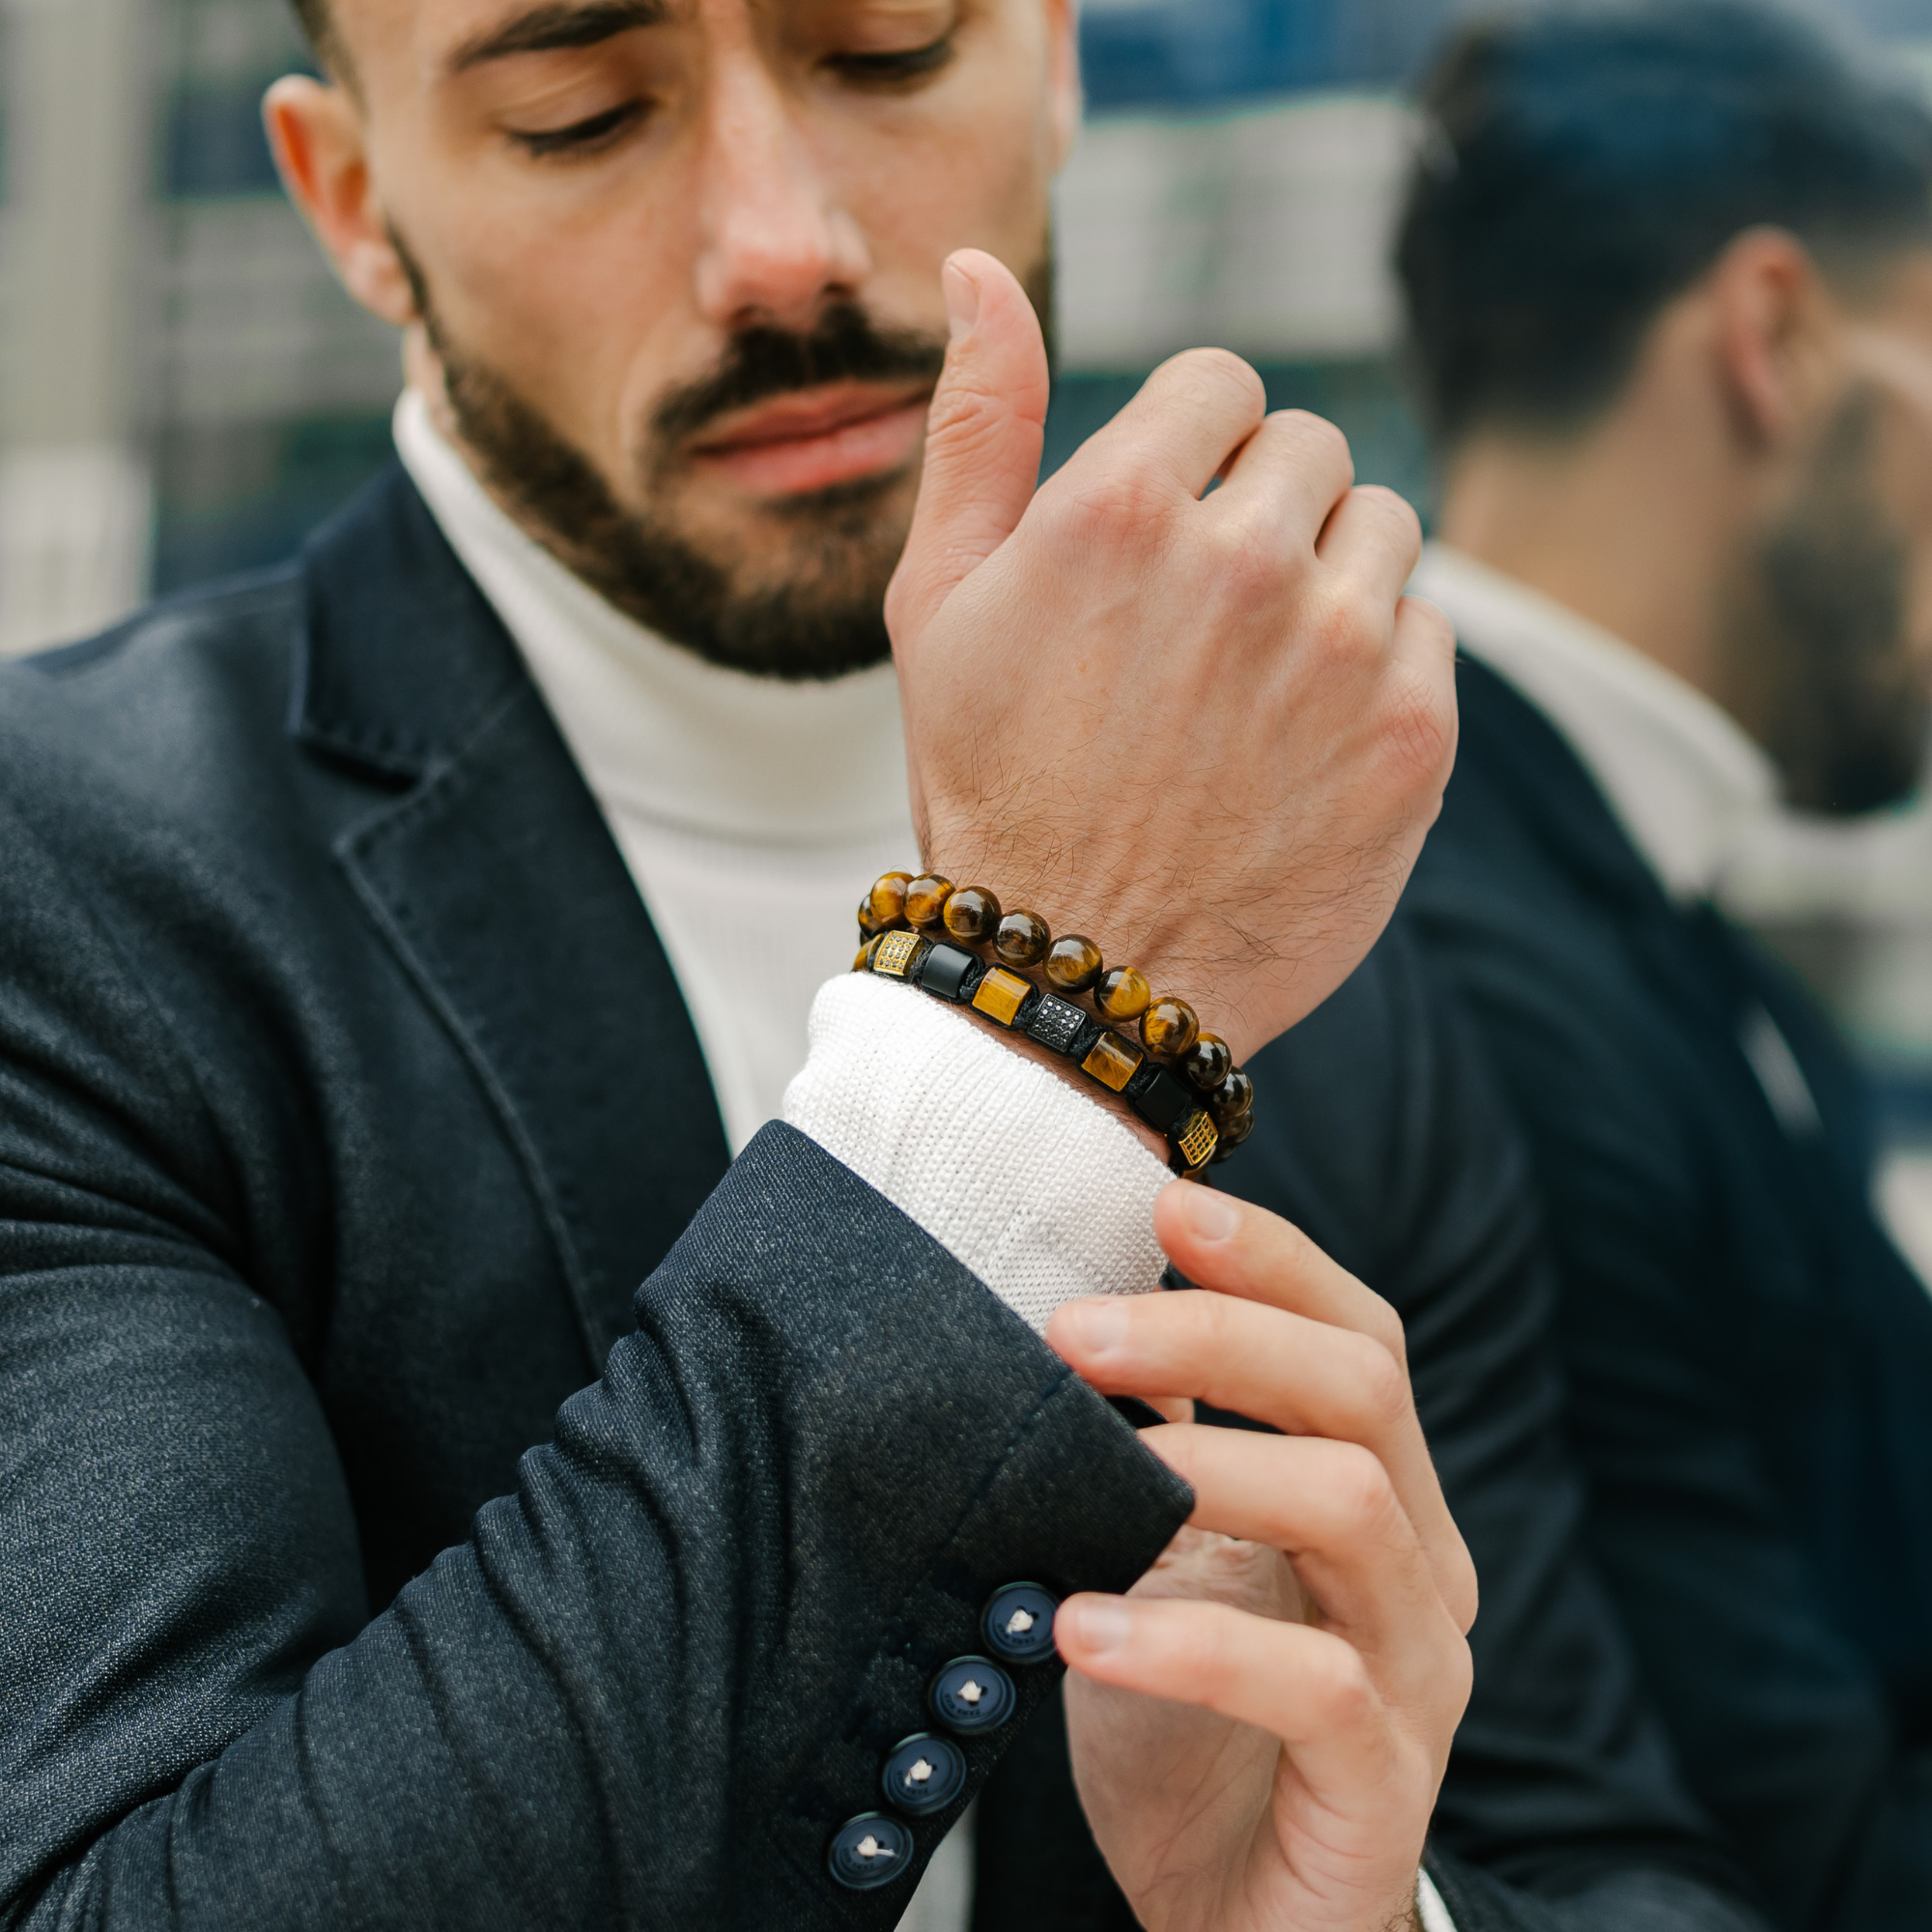 What are some good looking bracelets for men? - Quora